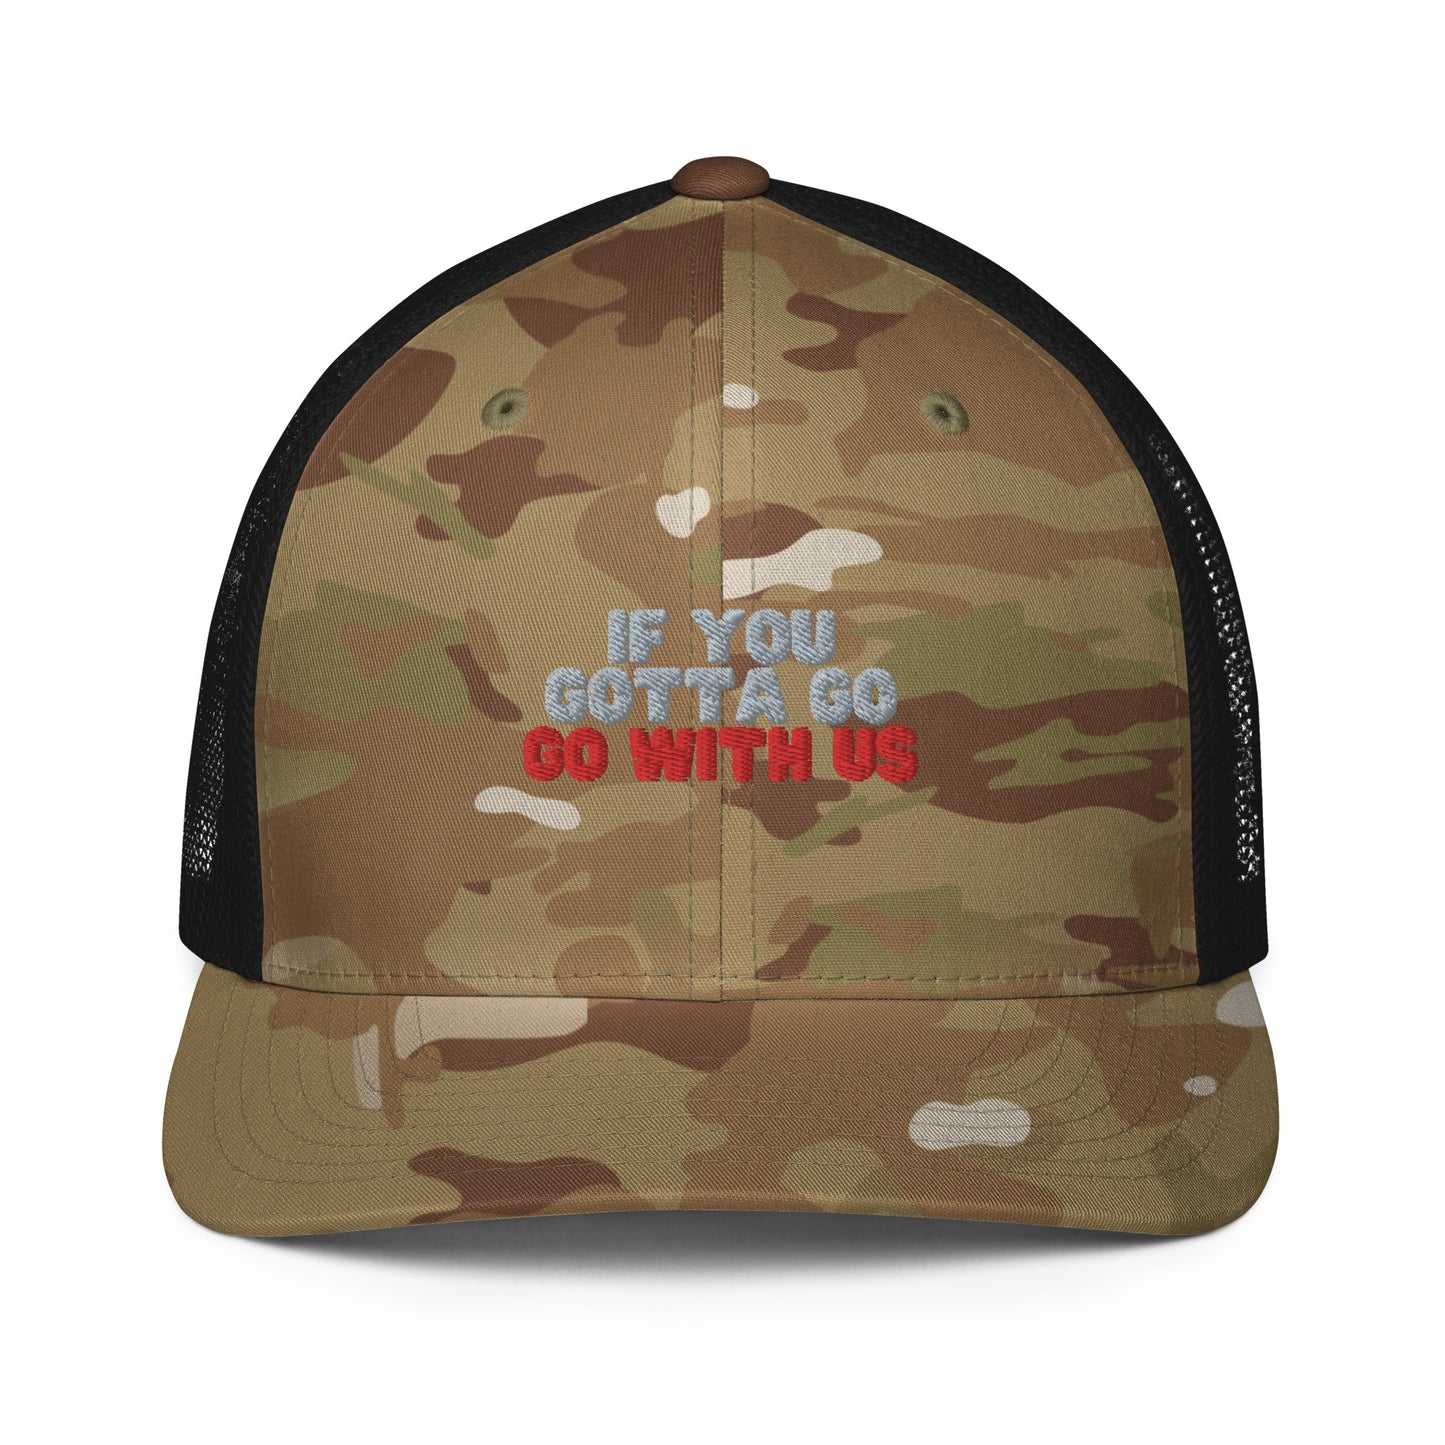 “If you gotta go, go with us” Closed-back trucker cap